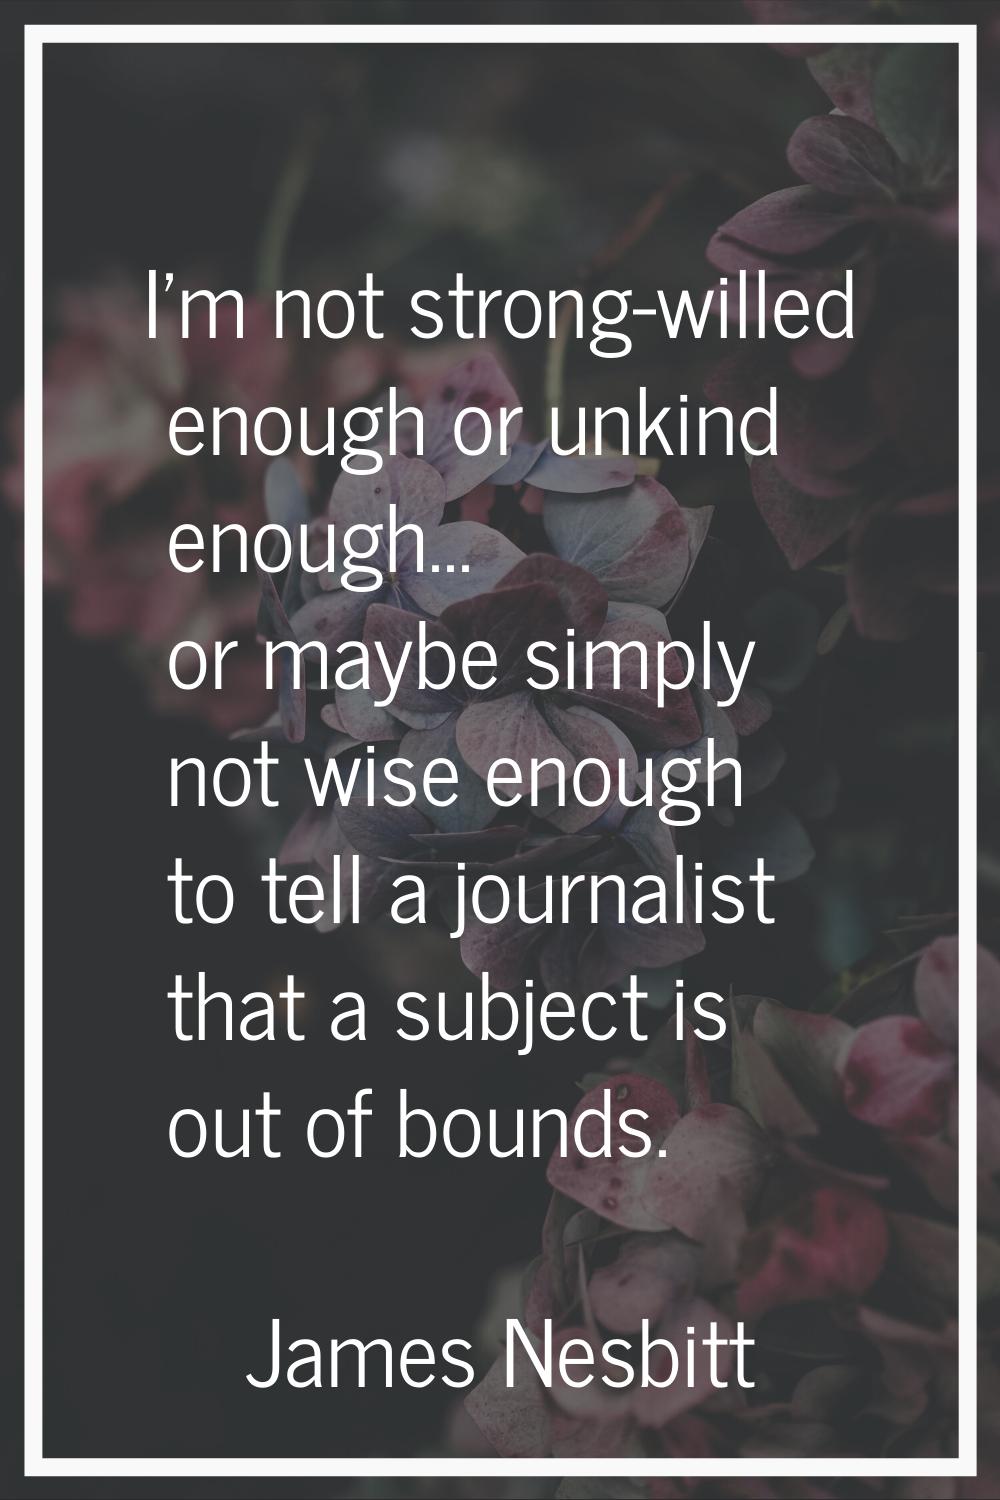 I'm not strong-willed enough or unkind enough... or maybe simply not wise enough to tell a journali